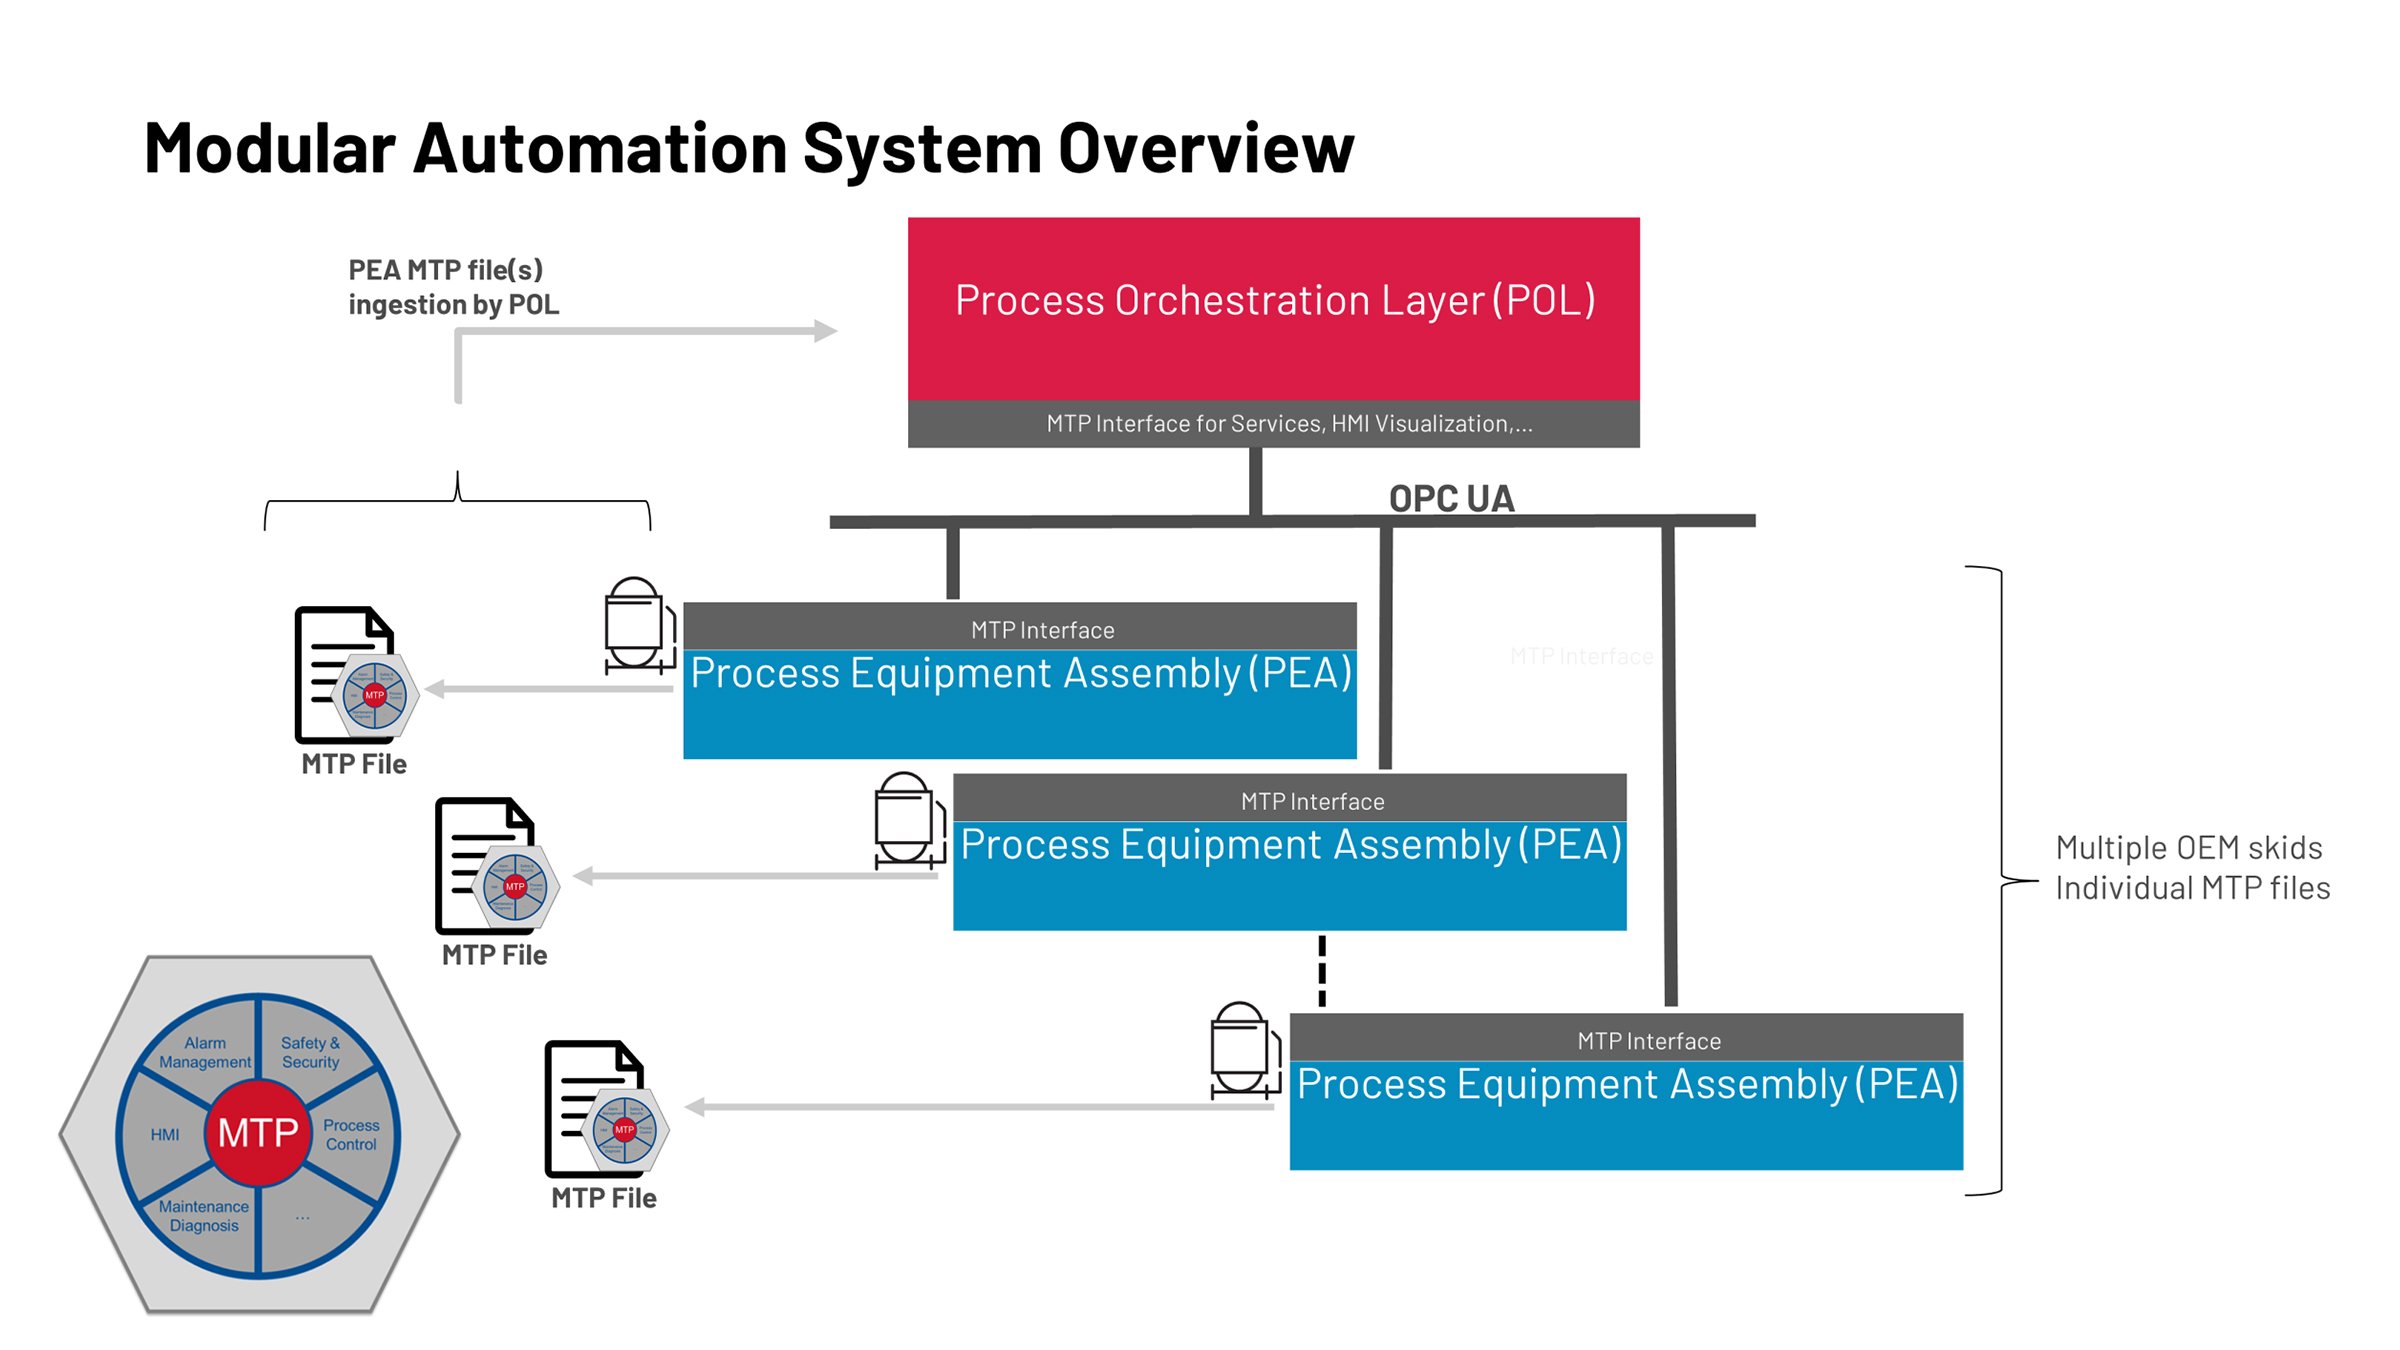 Modular automation systems oveview